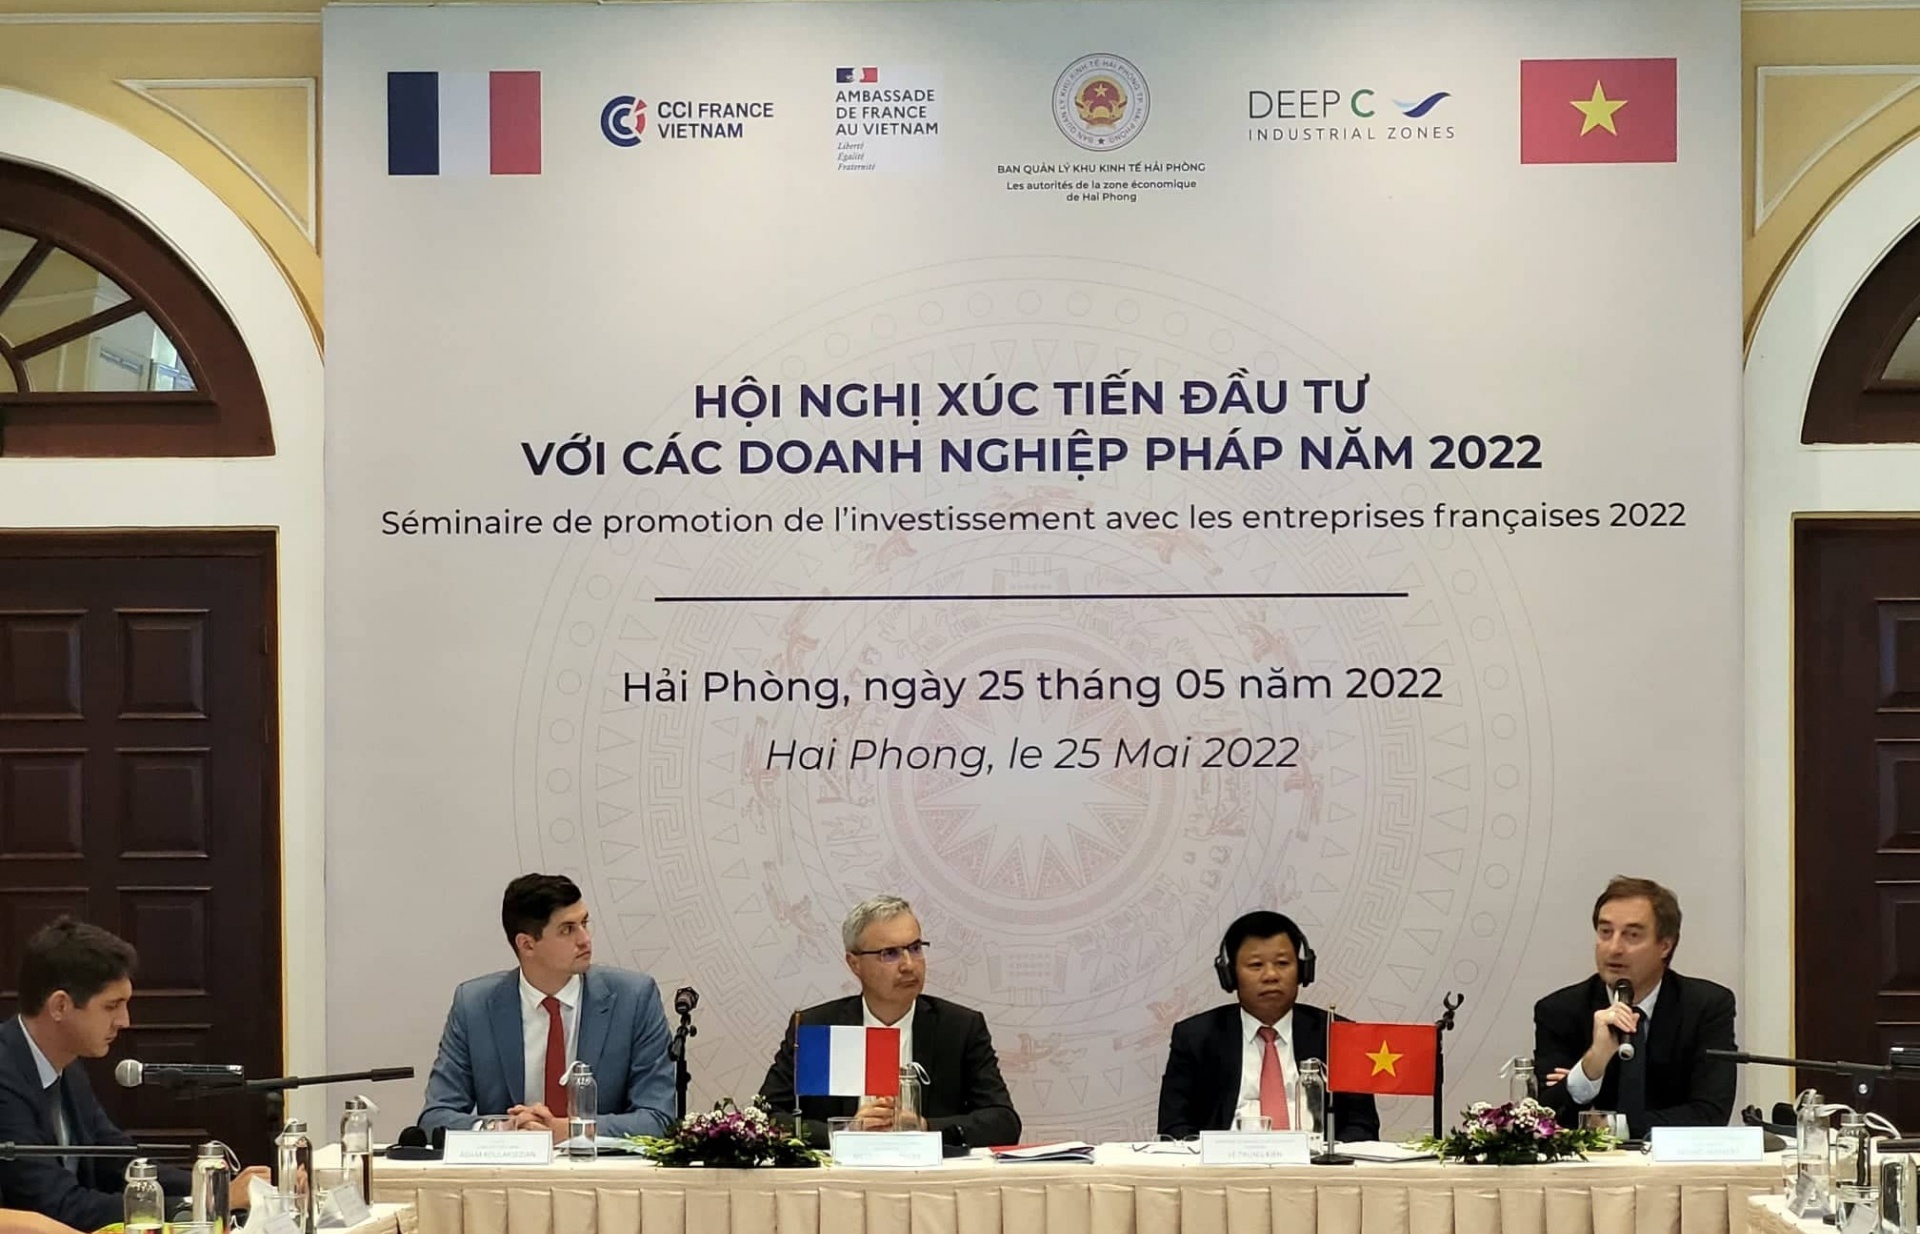 Haiphong promotes investment with French enterprises